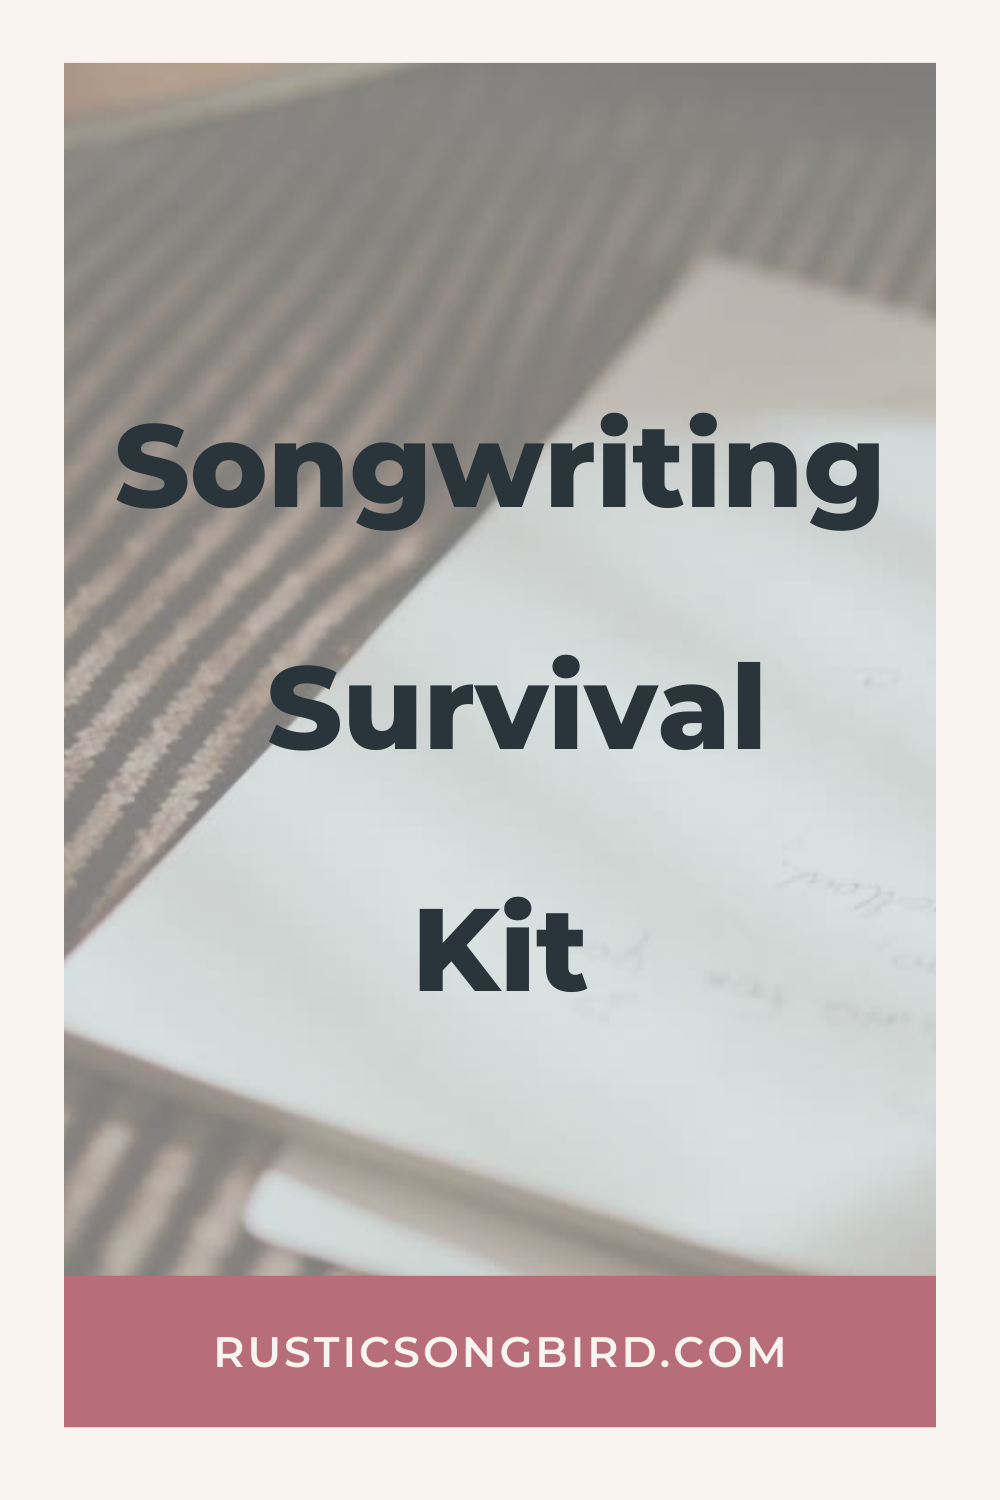 picture of notebook open on a table, with text of the title of the blog post called "songwriting survival kit"